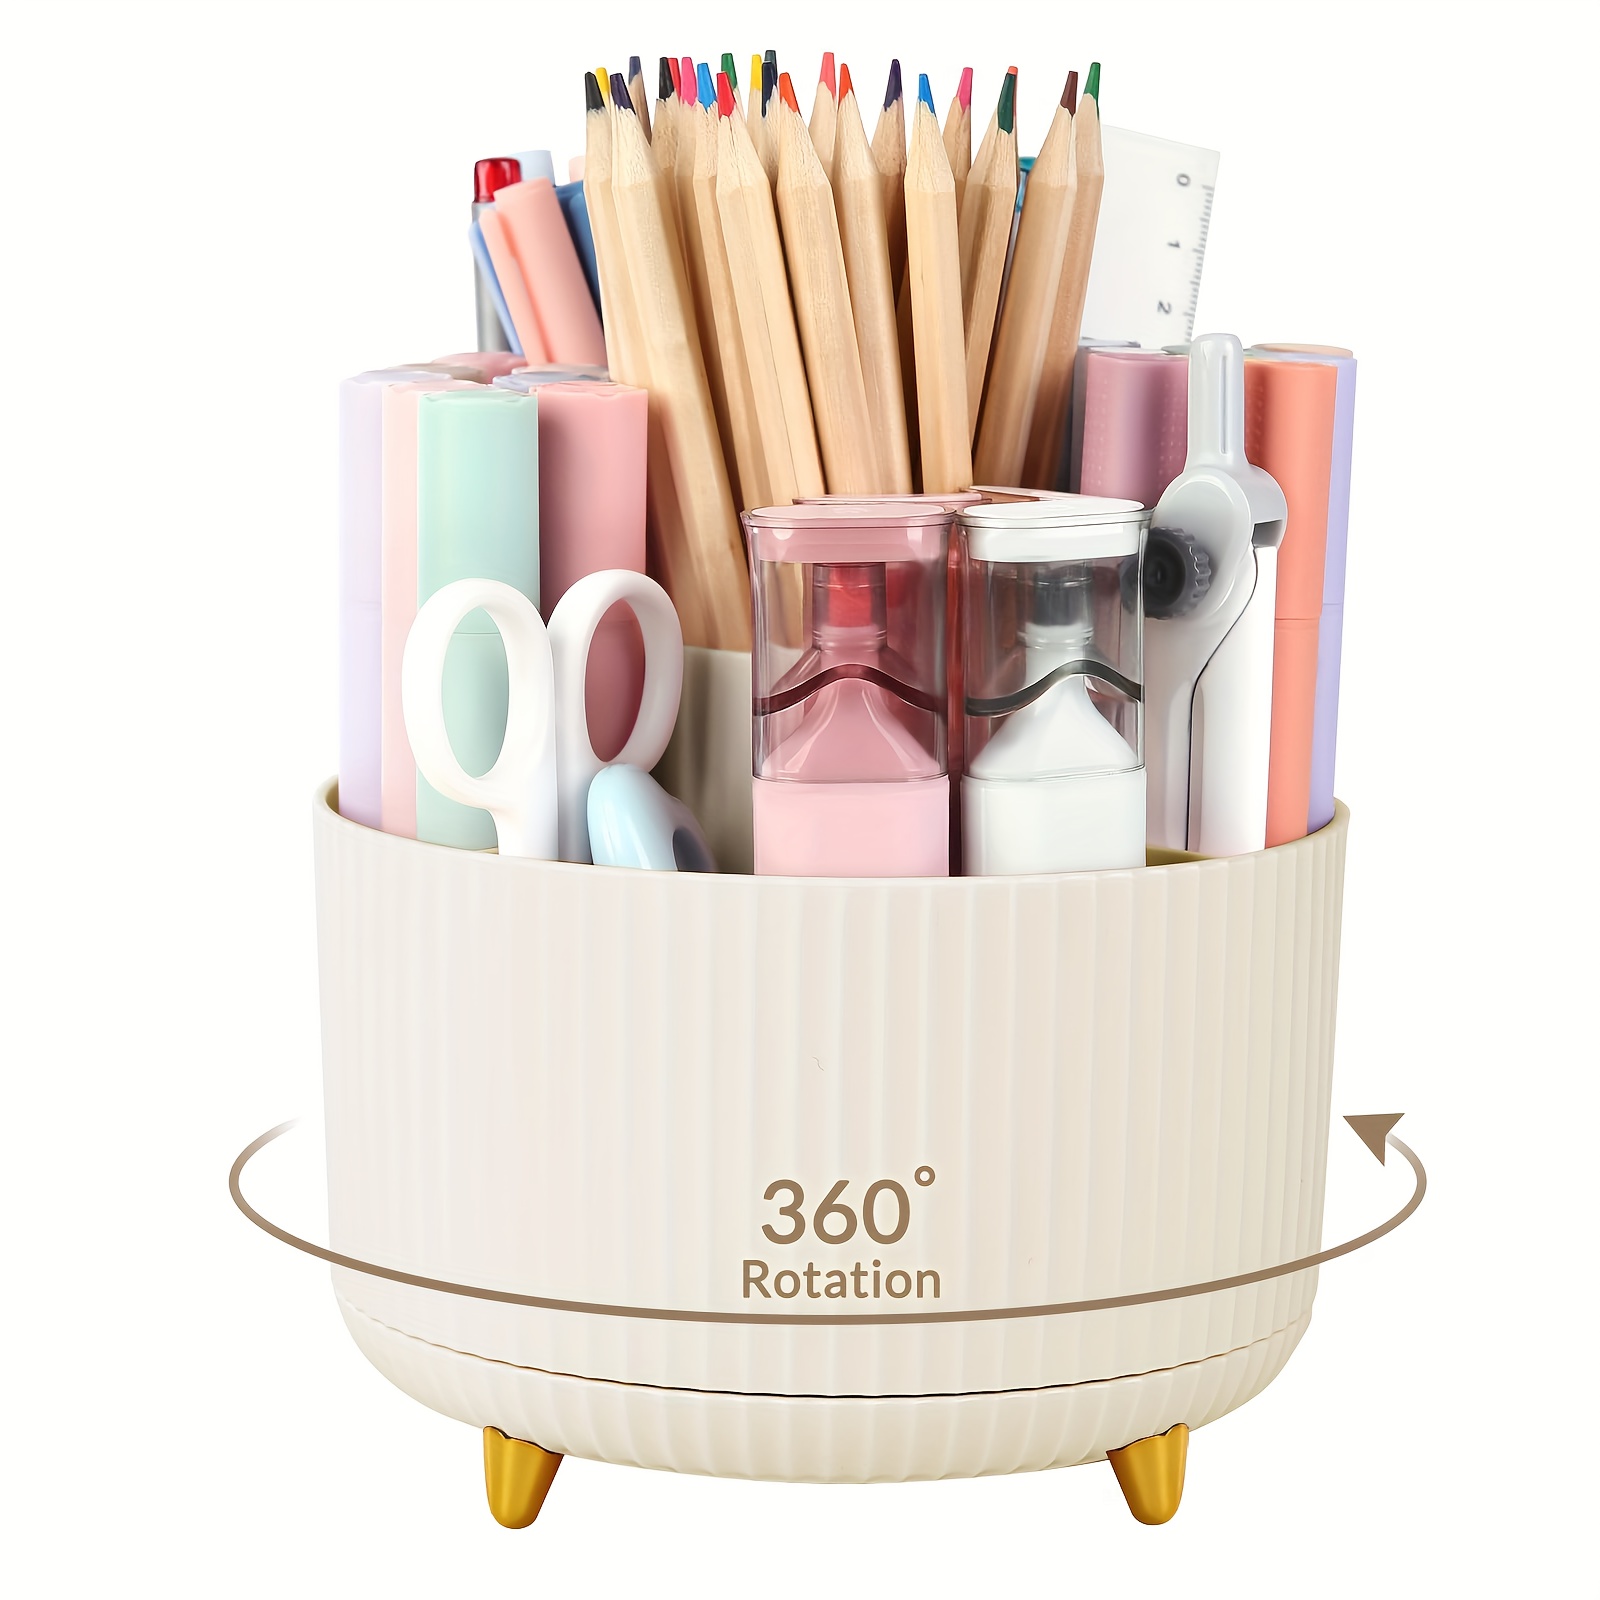 

1pc 360 Degree Rotating Desk Organizer, Dual-purpose Pencil Pen Holder For Desk, Rotating Desk Pen Organizer With 5 Slots, Art Supply, Pencil Cup For Office, School, Home